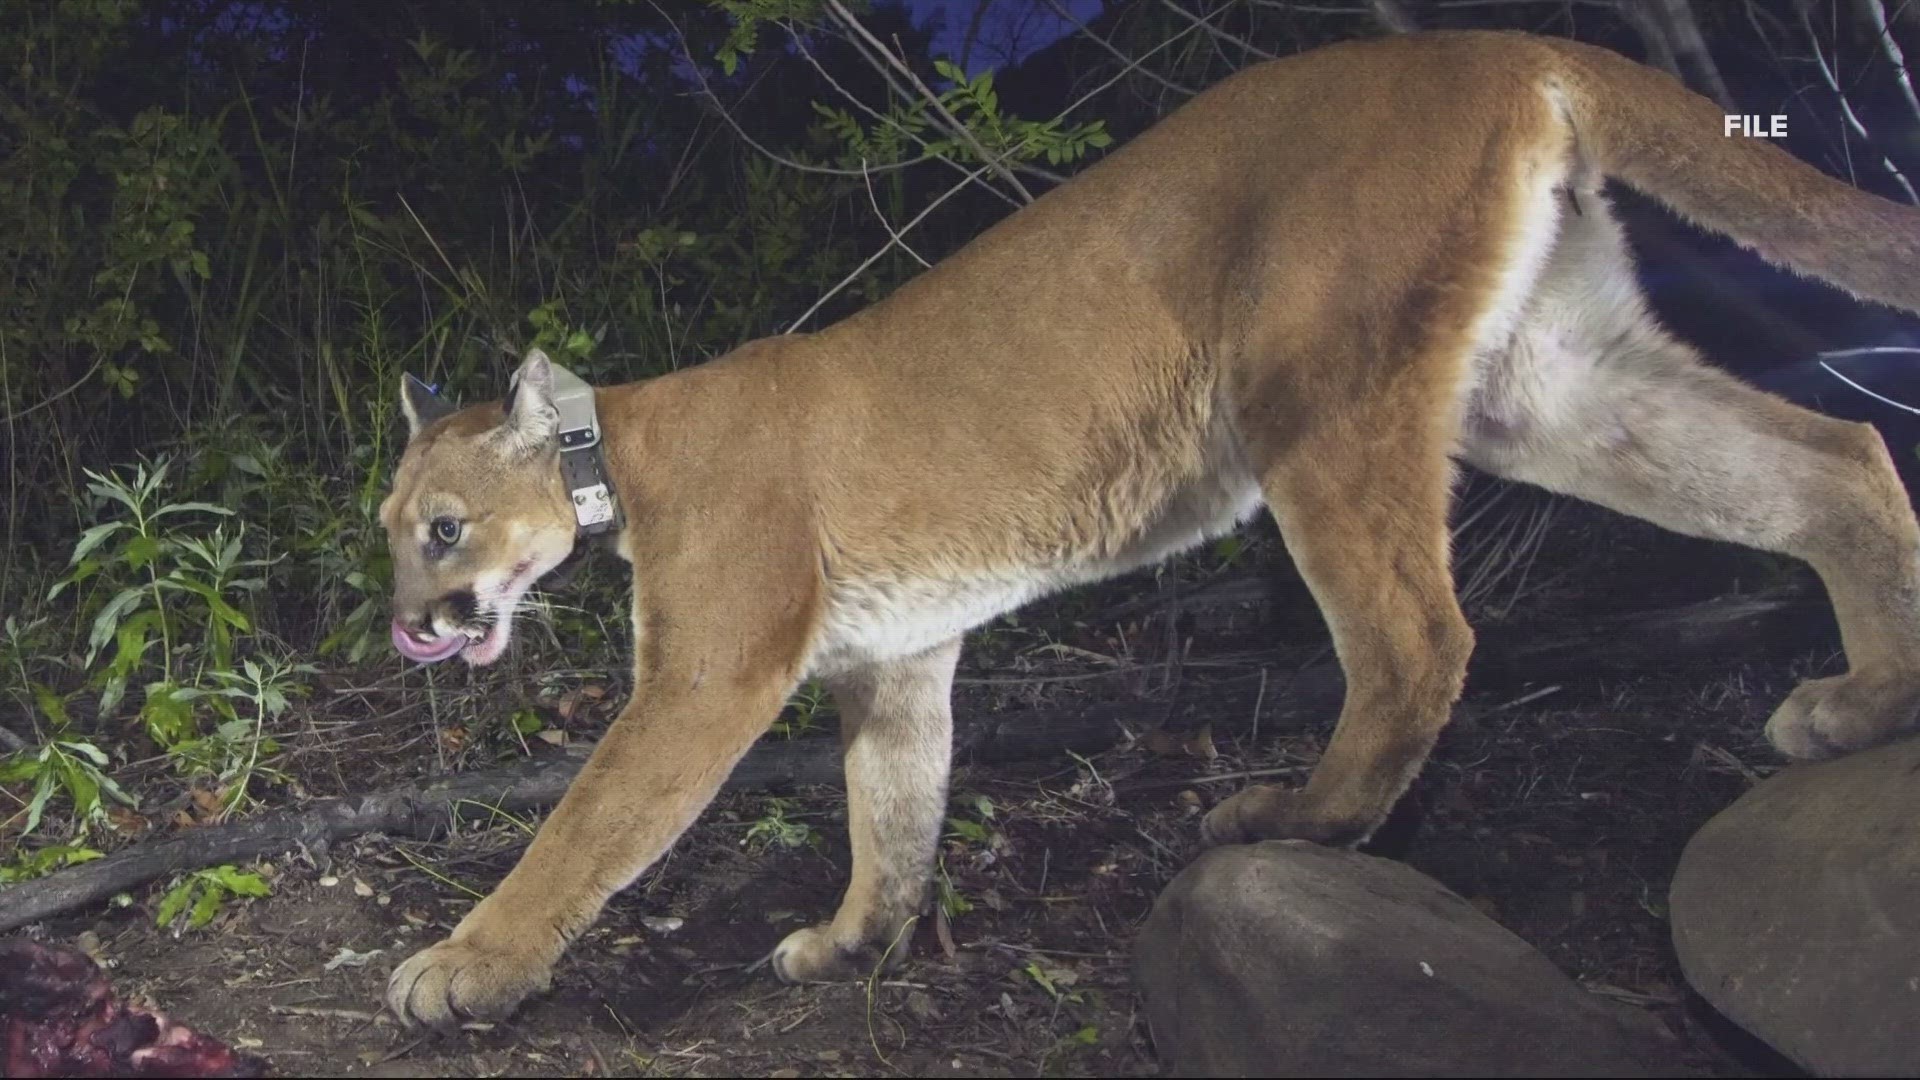 Cannon Beach police said there were two separate sightings on Monday, just weeks after a cougar climbed Haystack Rock. So what should you do if you see one?